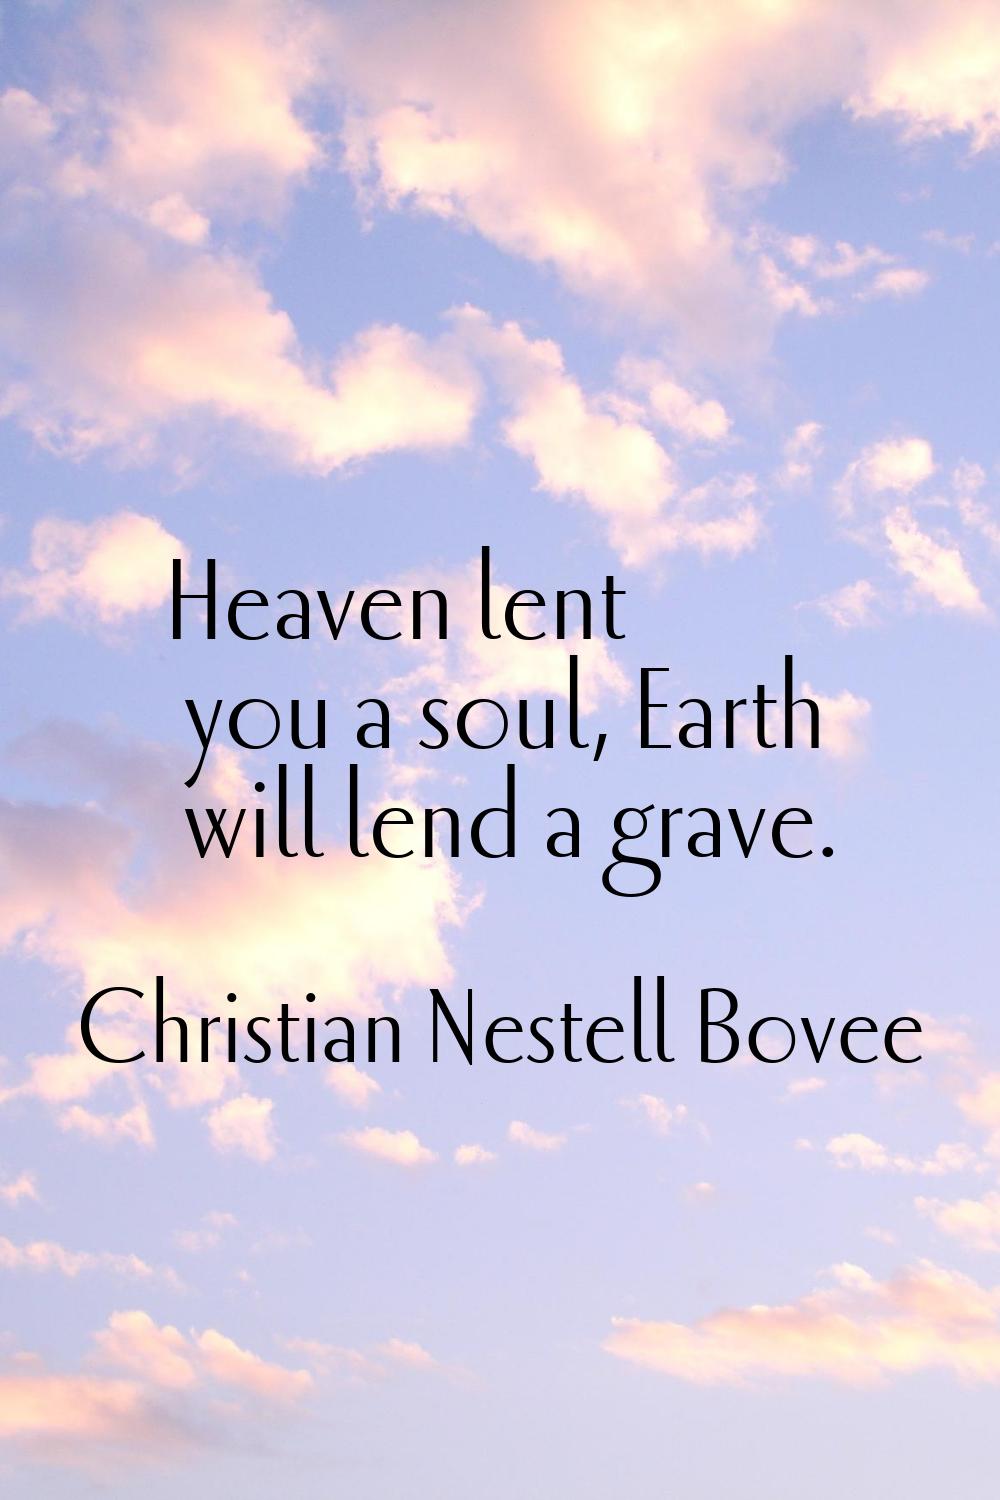 Heaven lent you a soul, Earth will lend a grave.